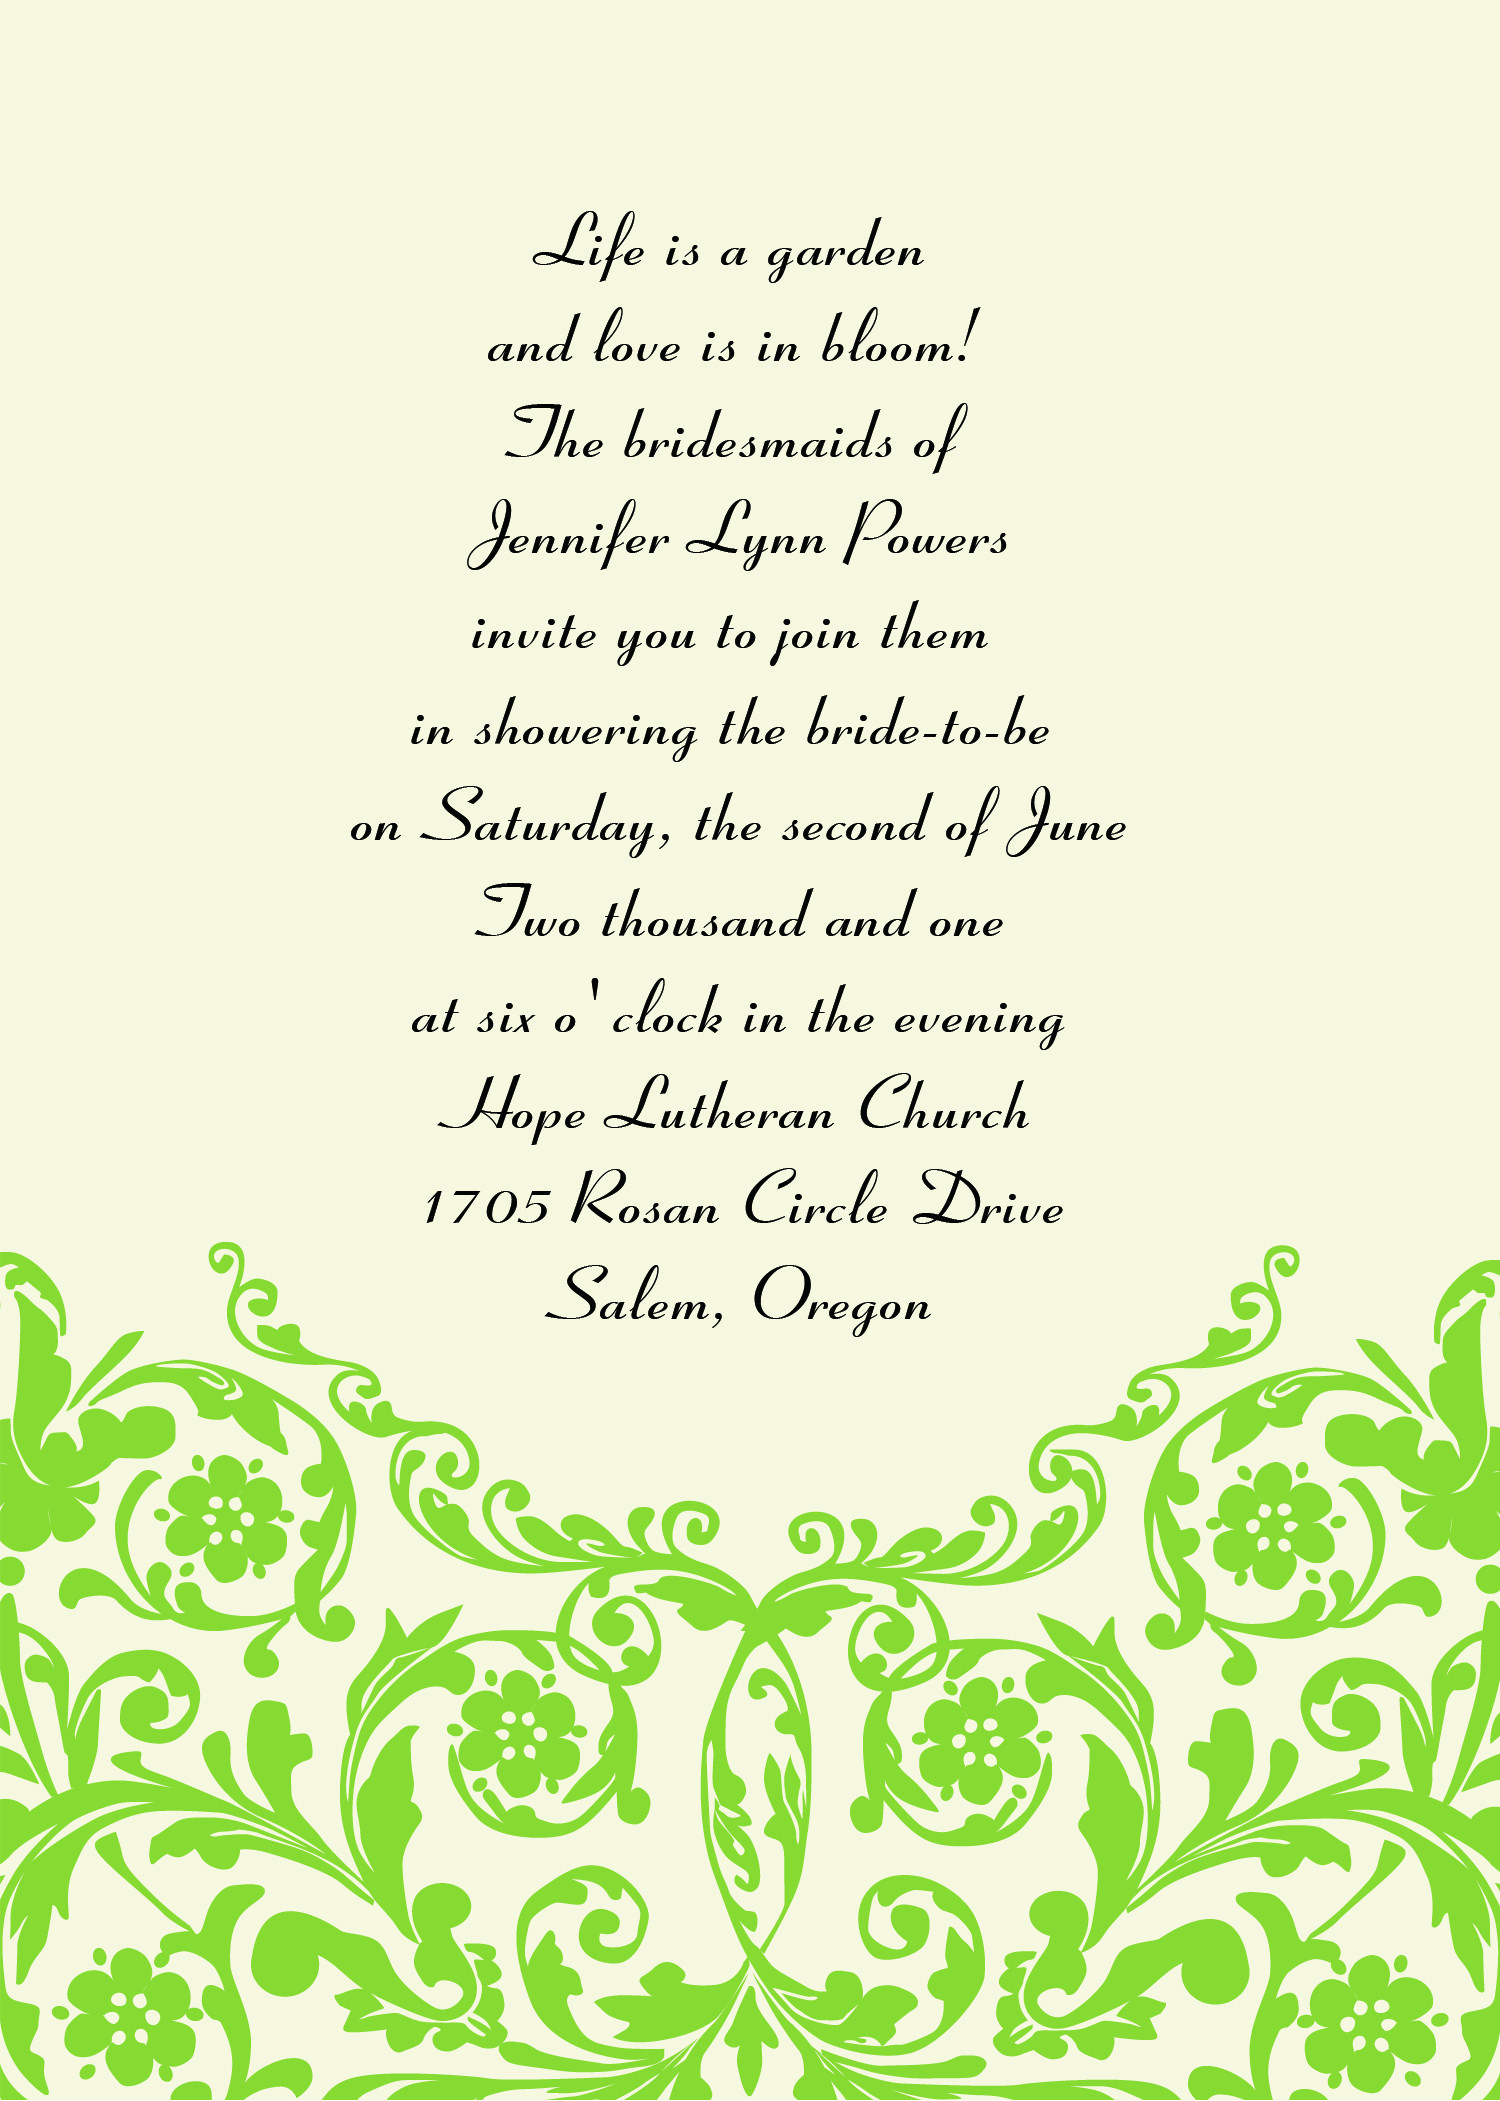 Marriage Invitation Quotes
 Wedding Invitation Sayings And Quotes QuotesGram